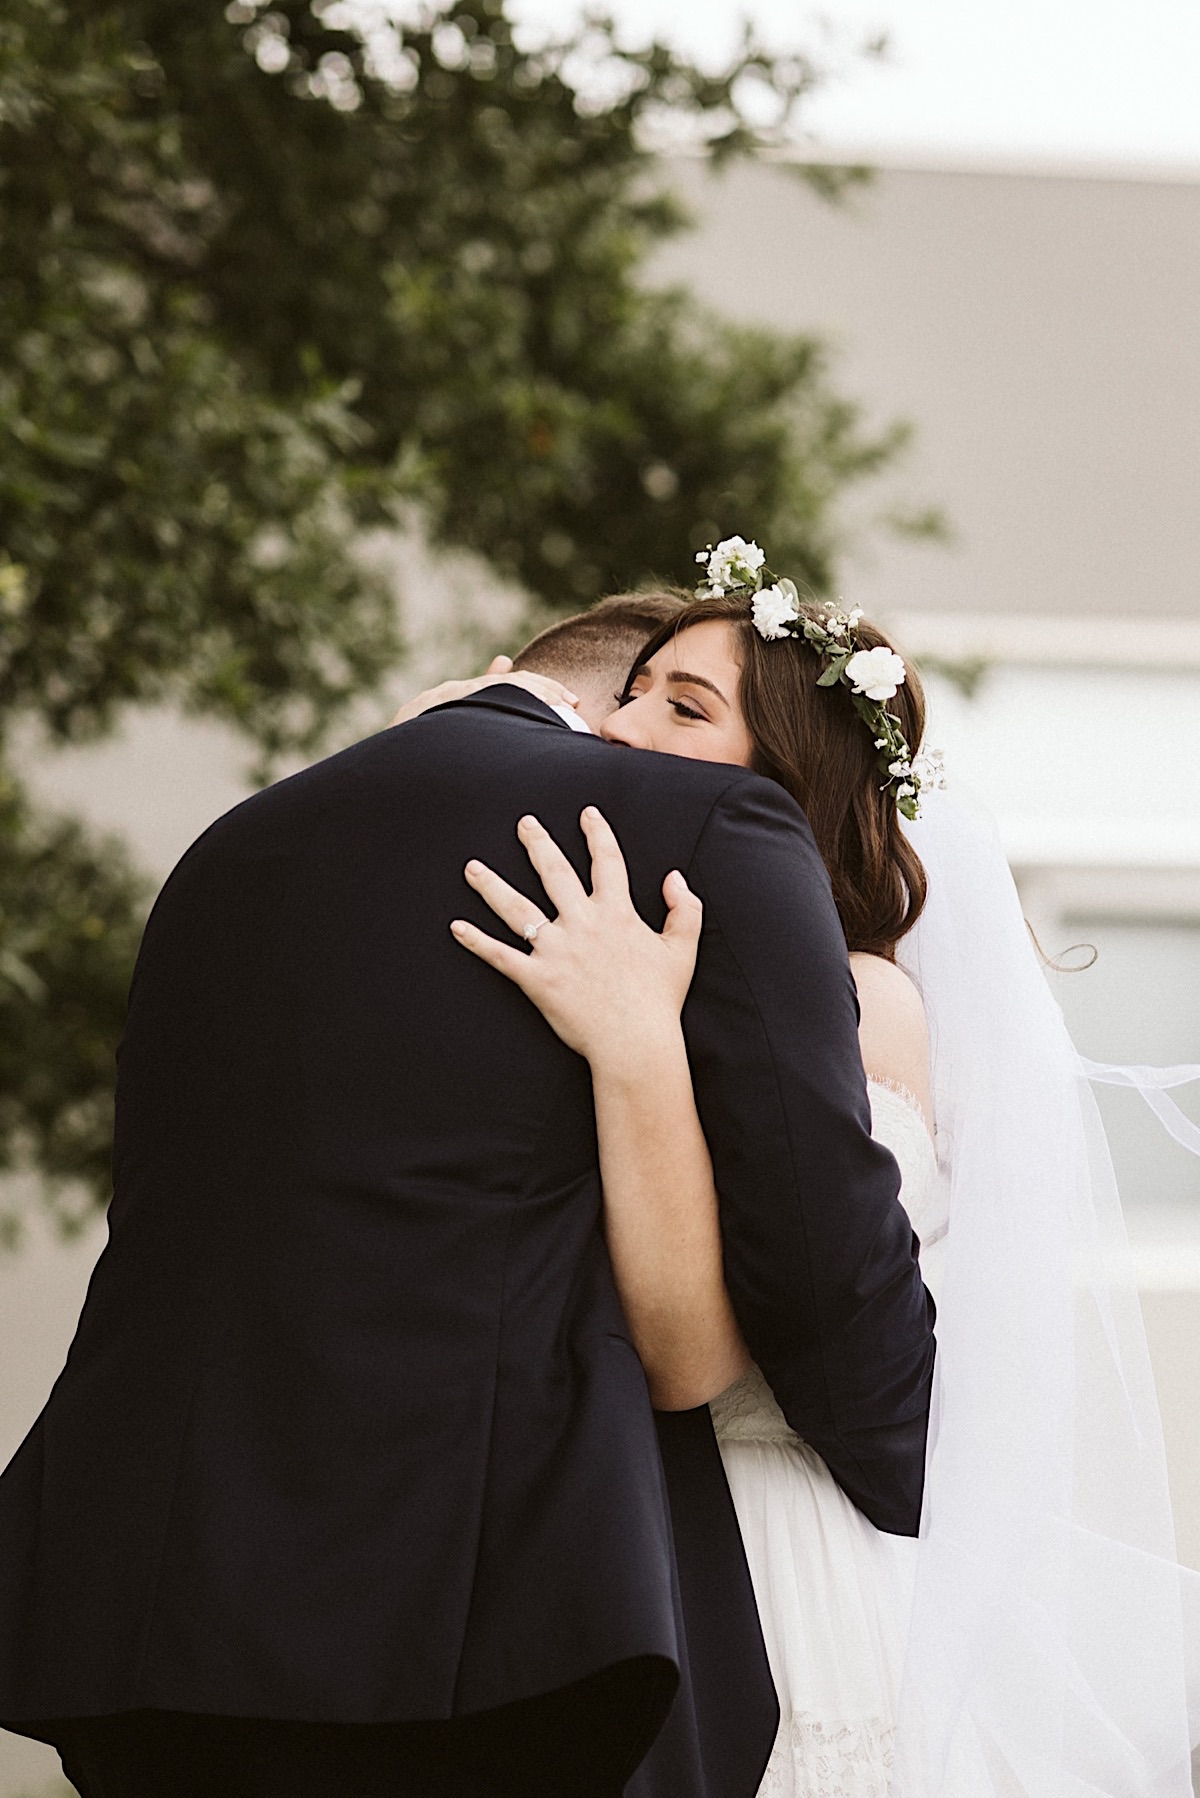 Bride and groom hug, her hand gripping the back of his shoulder.